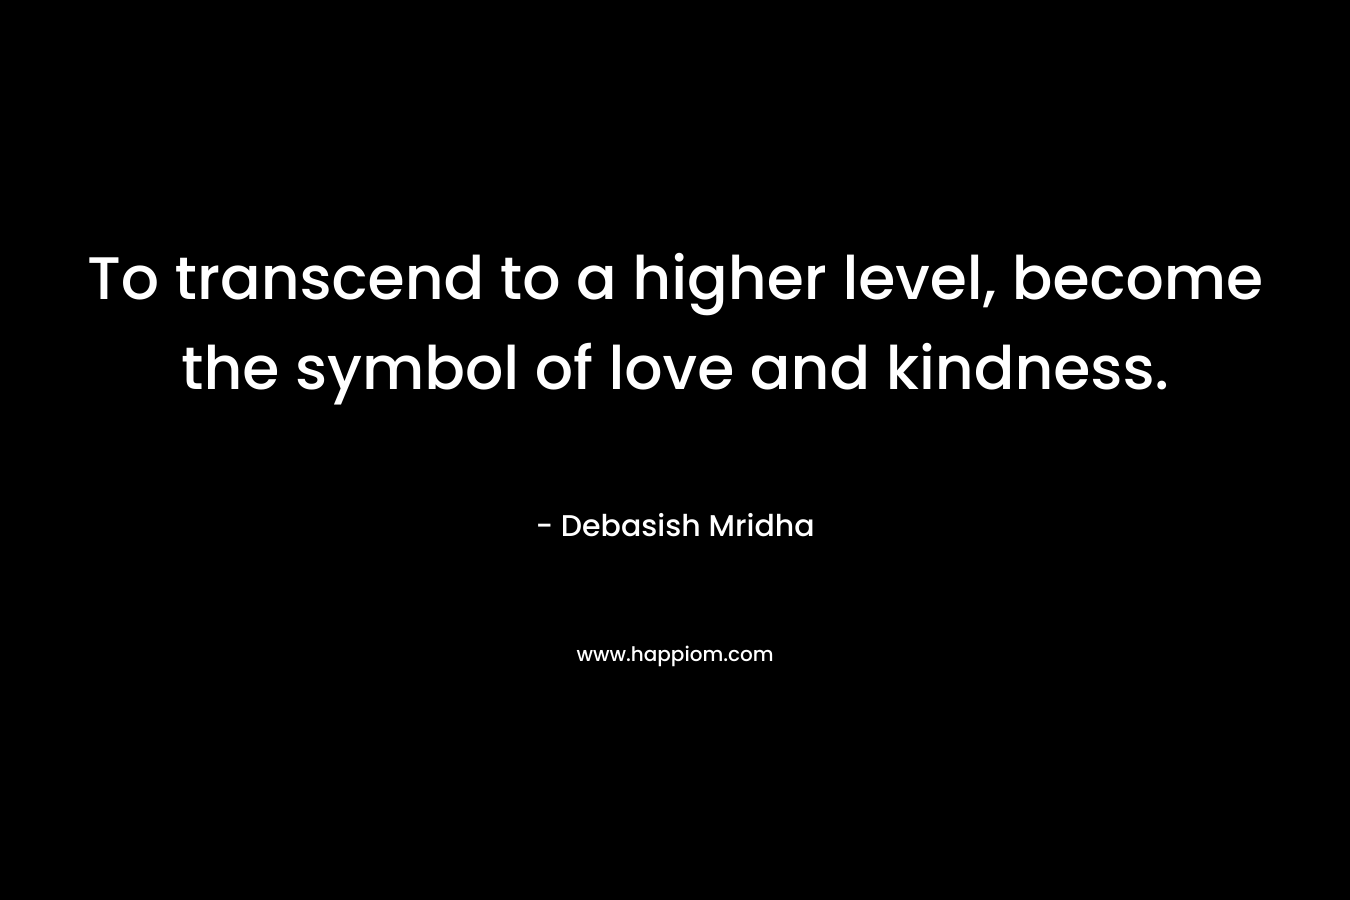 To transcend to a higher level, become the symbol of love and kindness. – Debasish Mridha